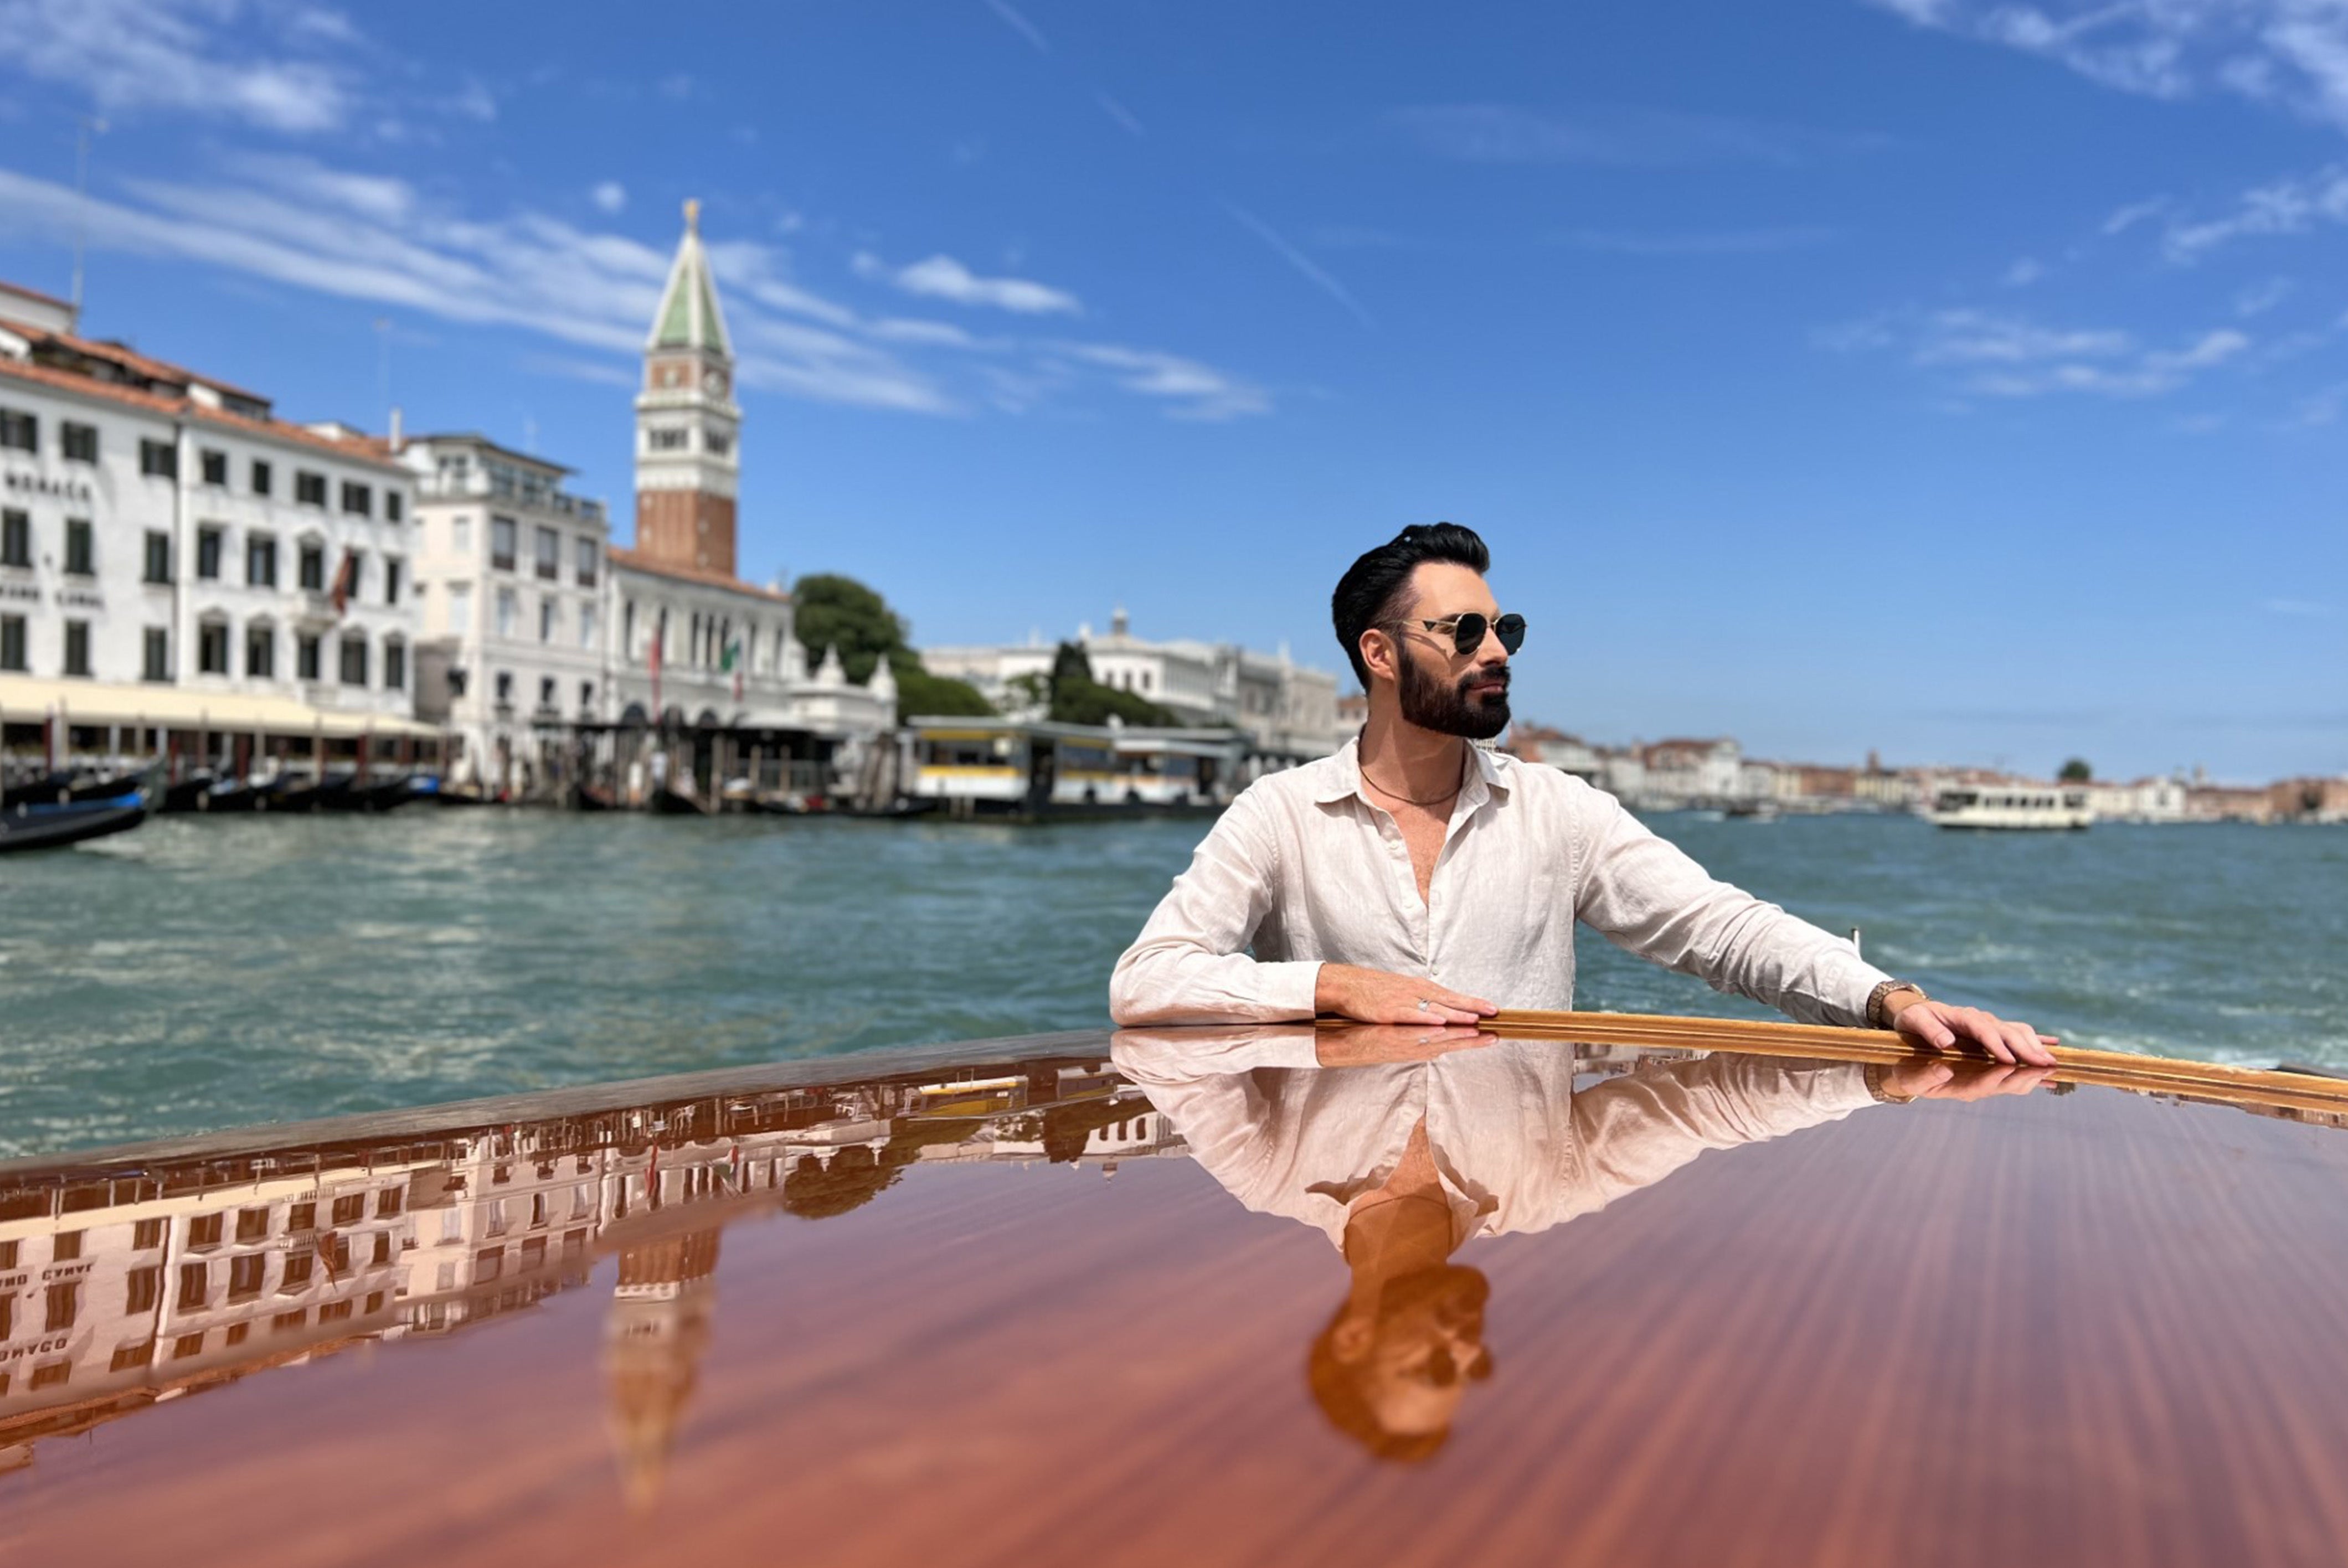 There’s a stylish stop in famed gondola ground, Venice